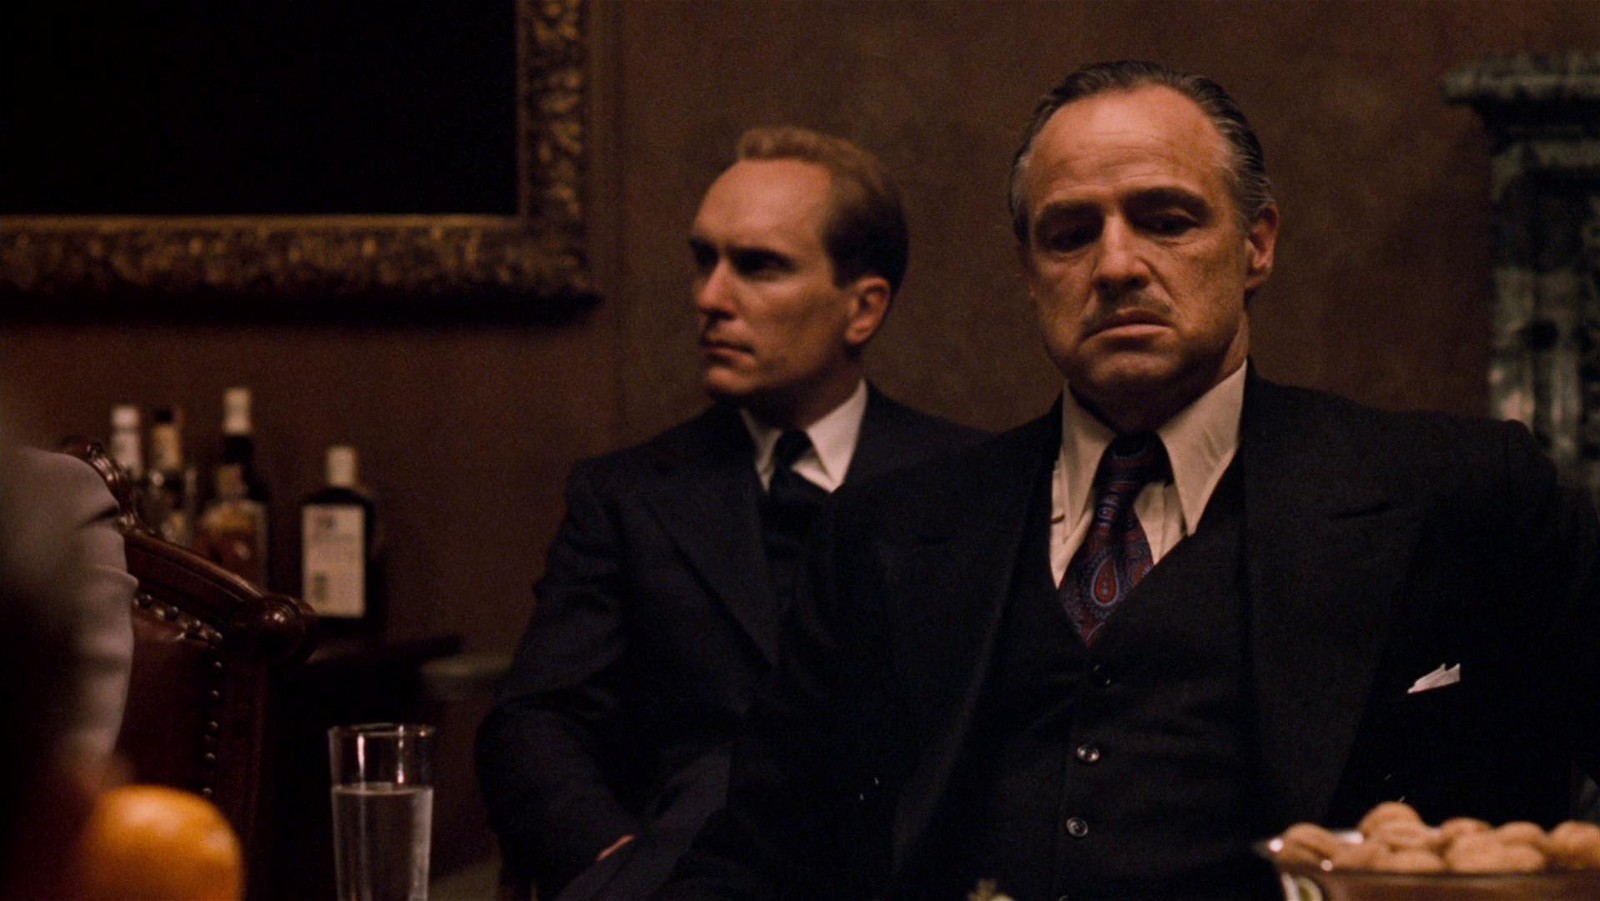 Robert Duvall with Marlon Brando in a scene from The Godfather